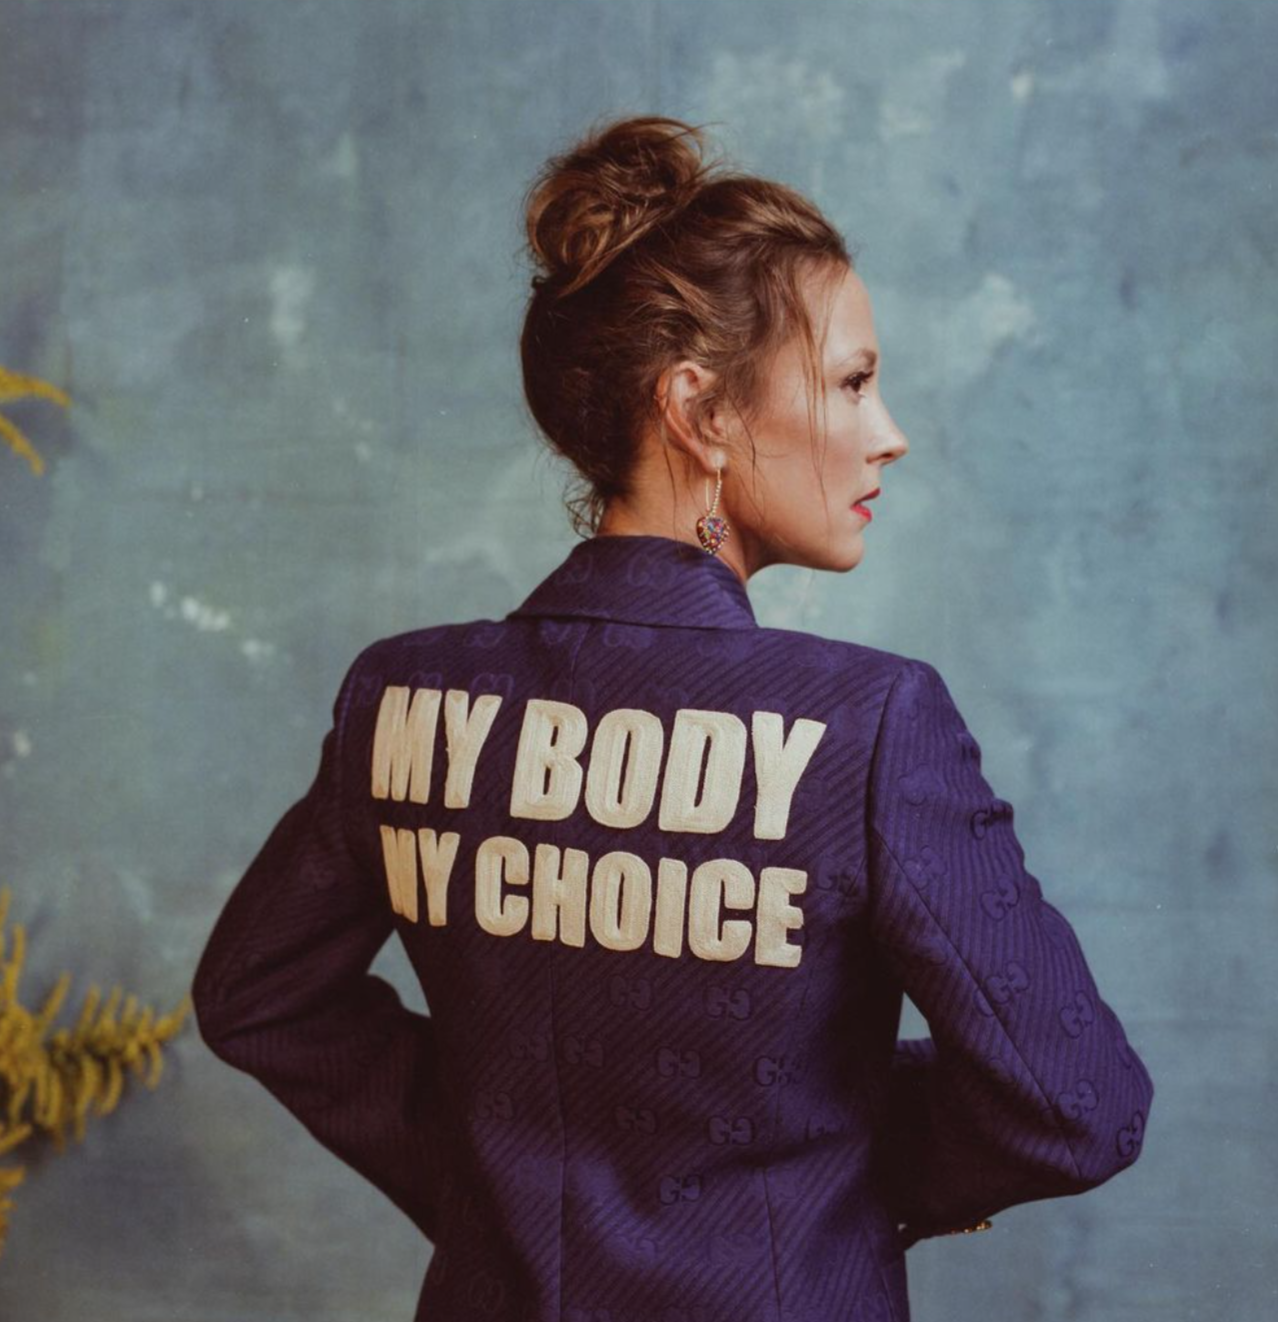 Amanda Shires wears a fitted jacket that reads "My Body My Choice" on the back